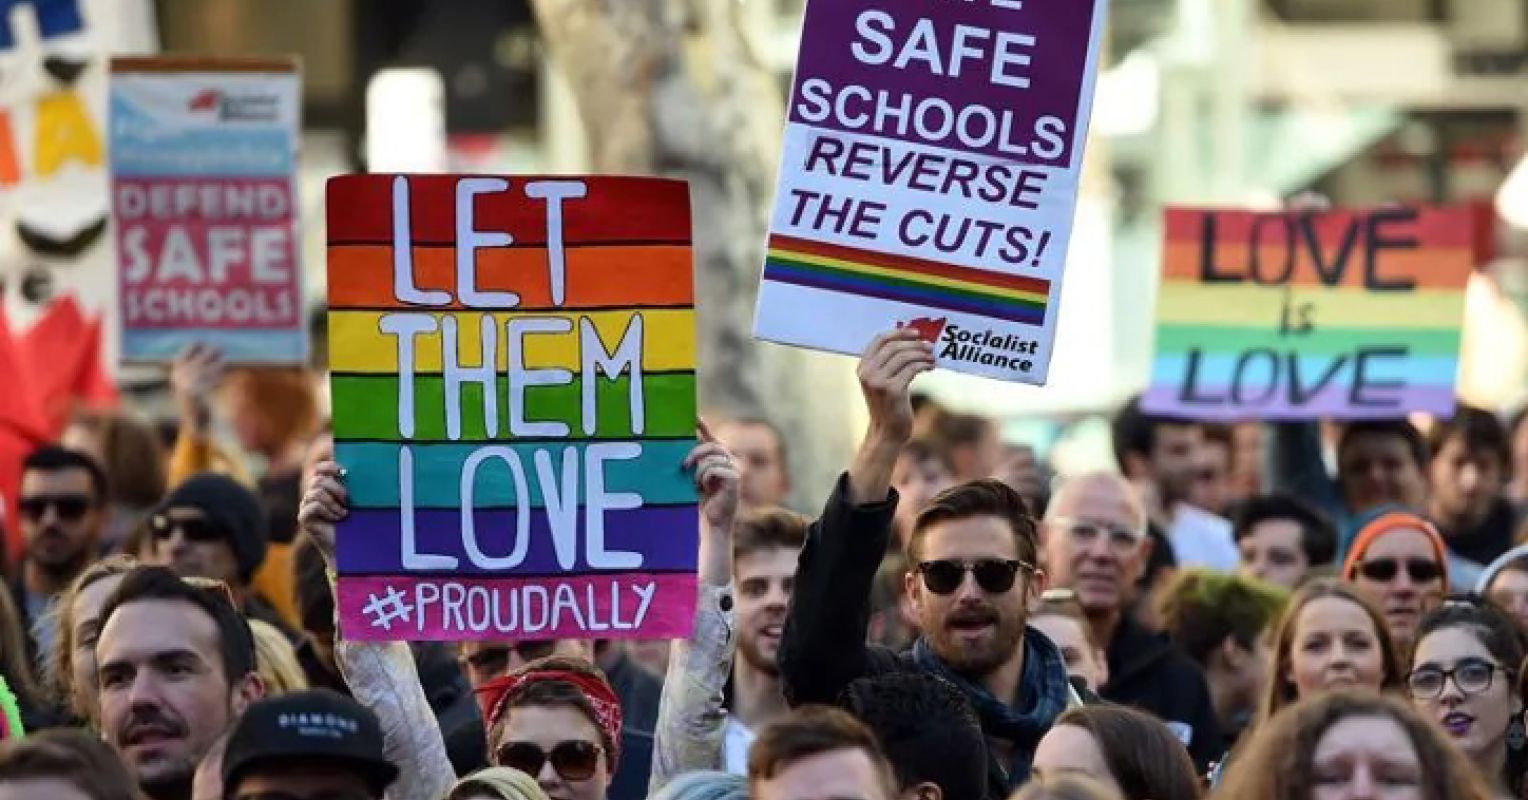 LGBTQ+ and the culture of violence in education